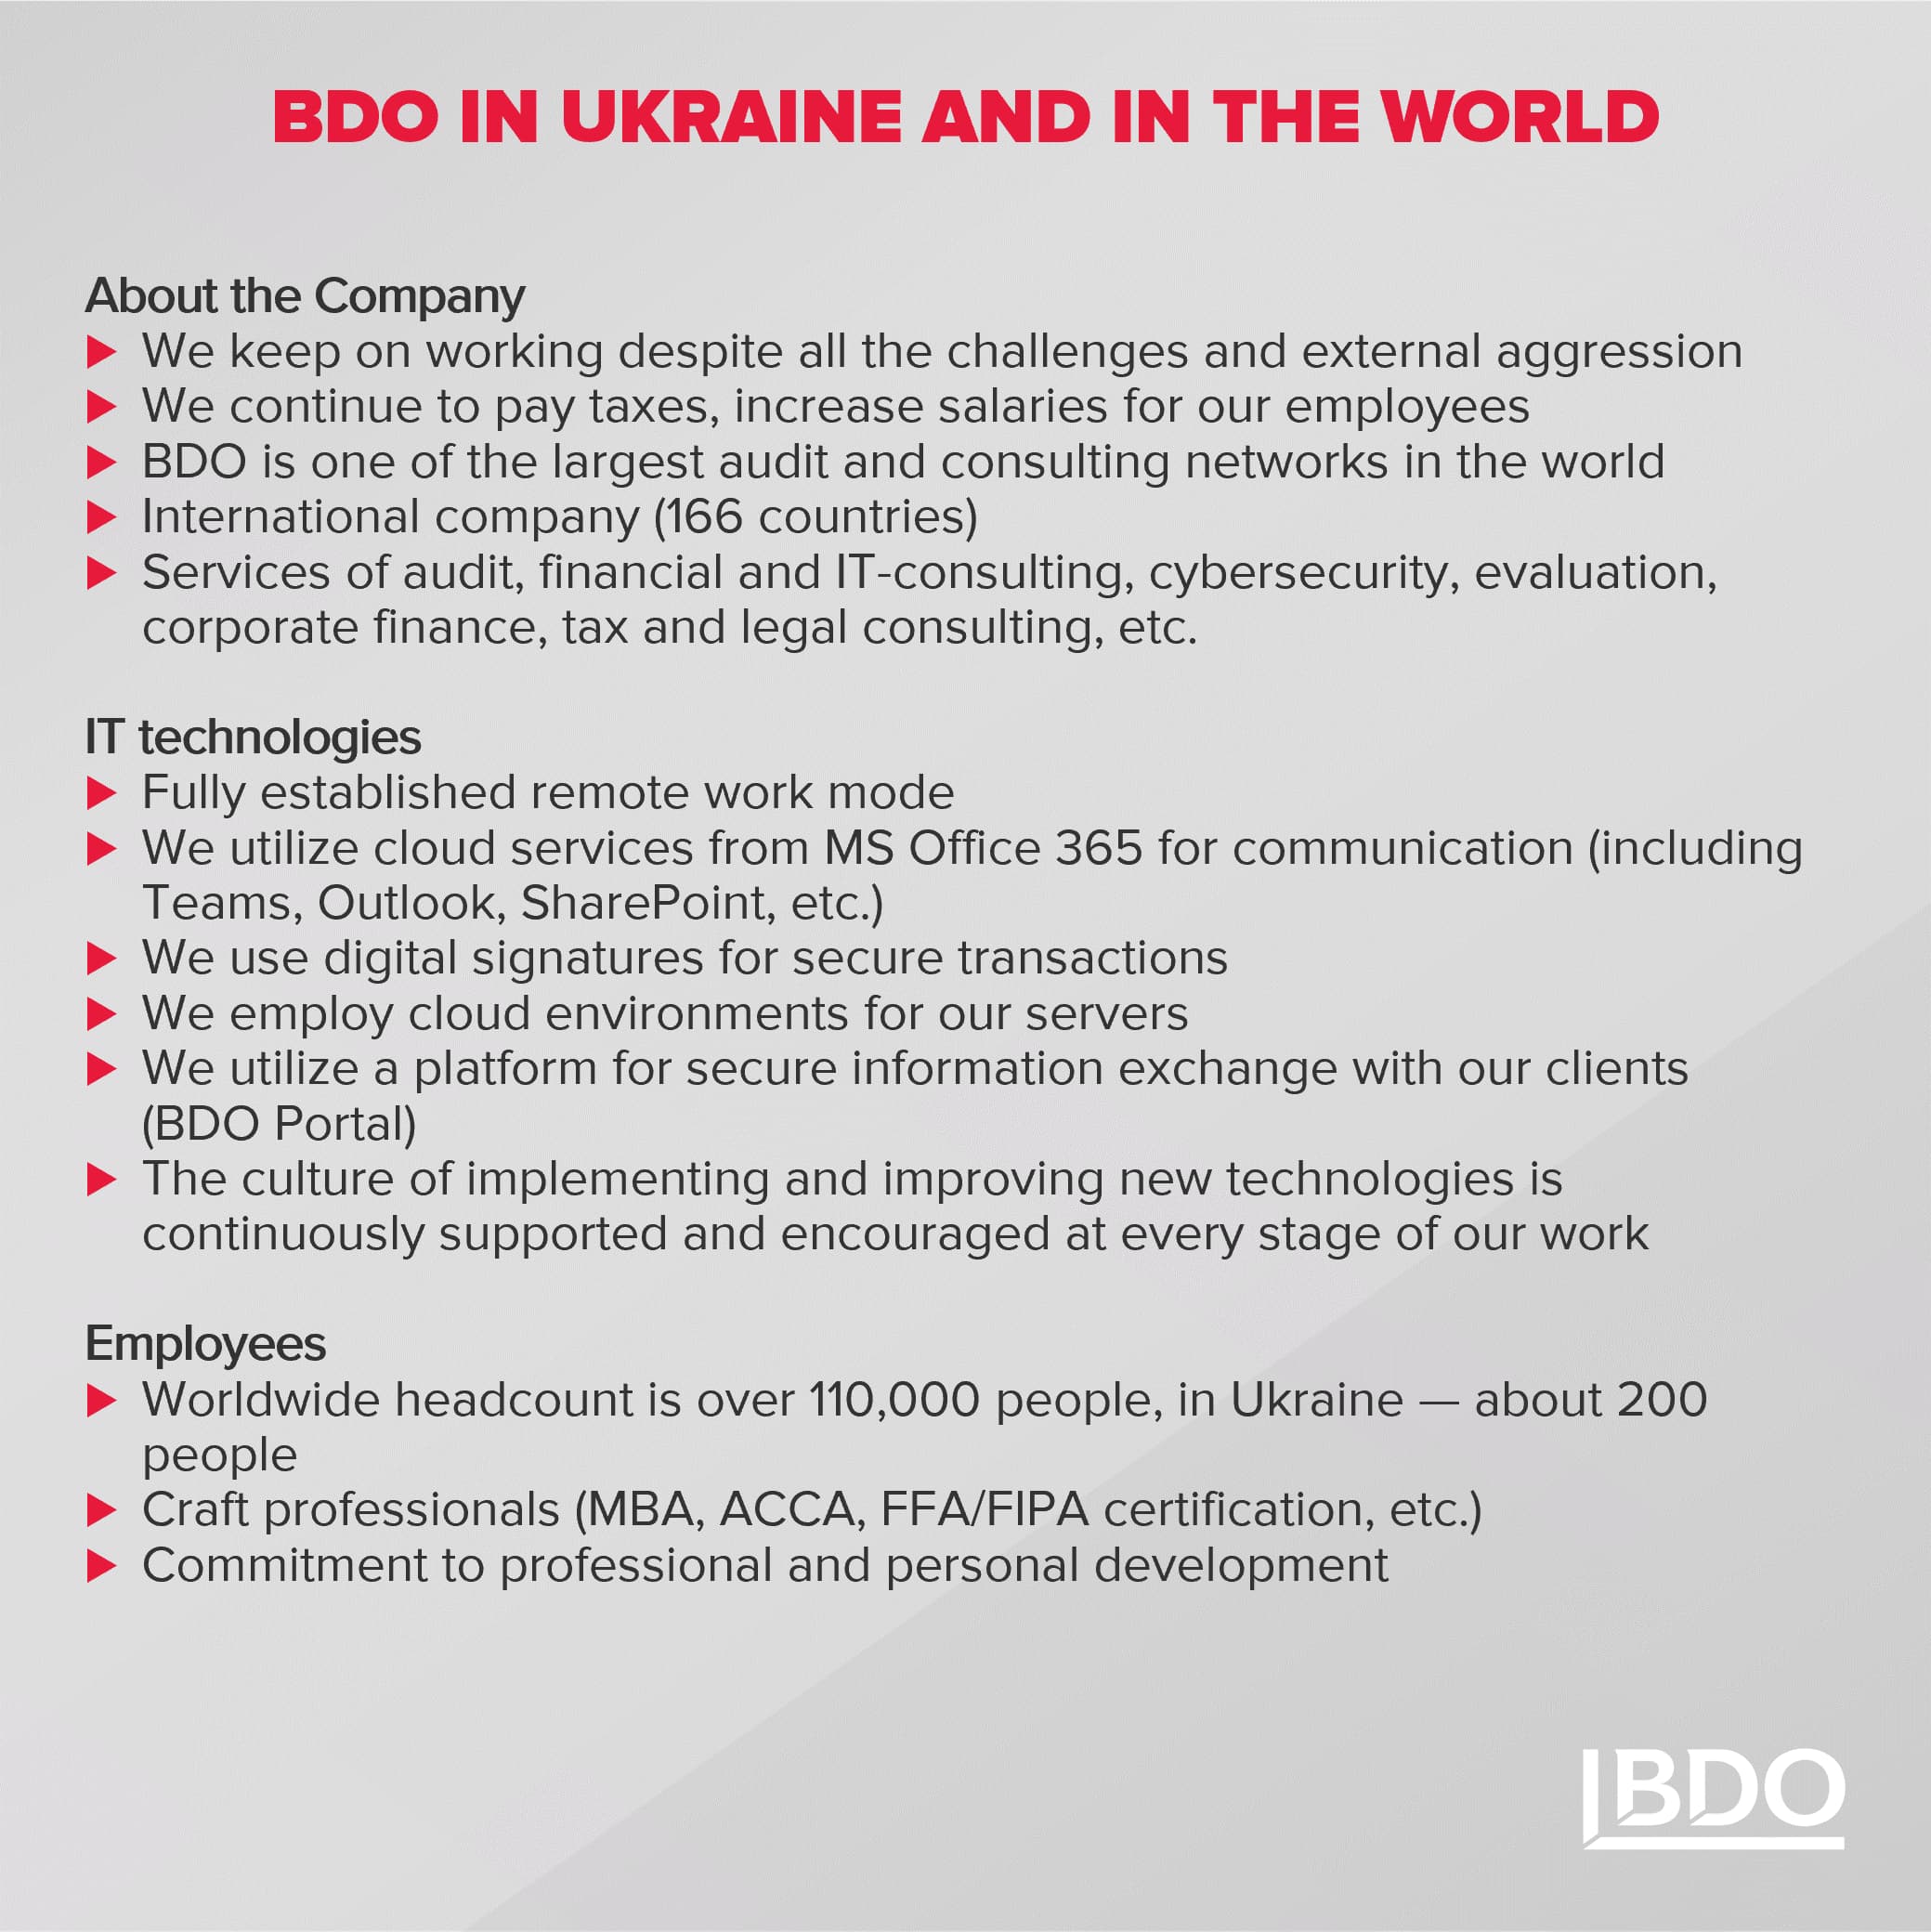 BDO In Ukraine and in the World